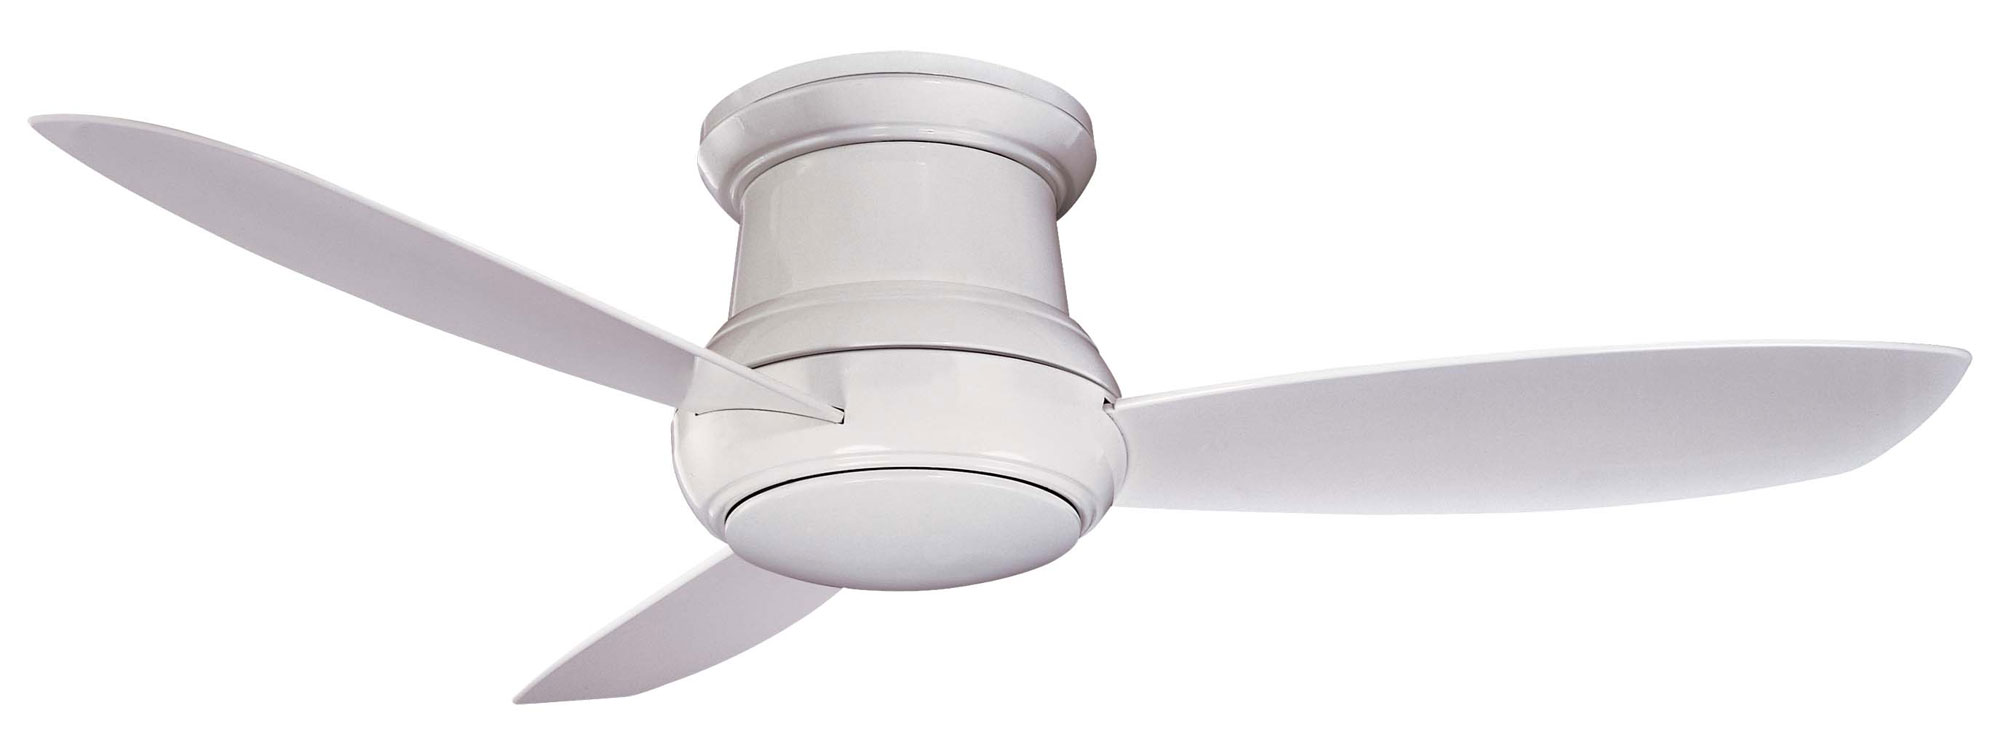 G Squared Art | Best ceiling fan for low ceiling – how to choose a ceiling an 8 foot